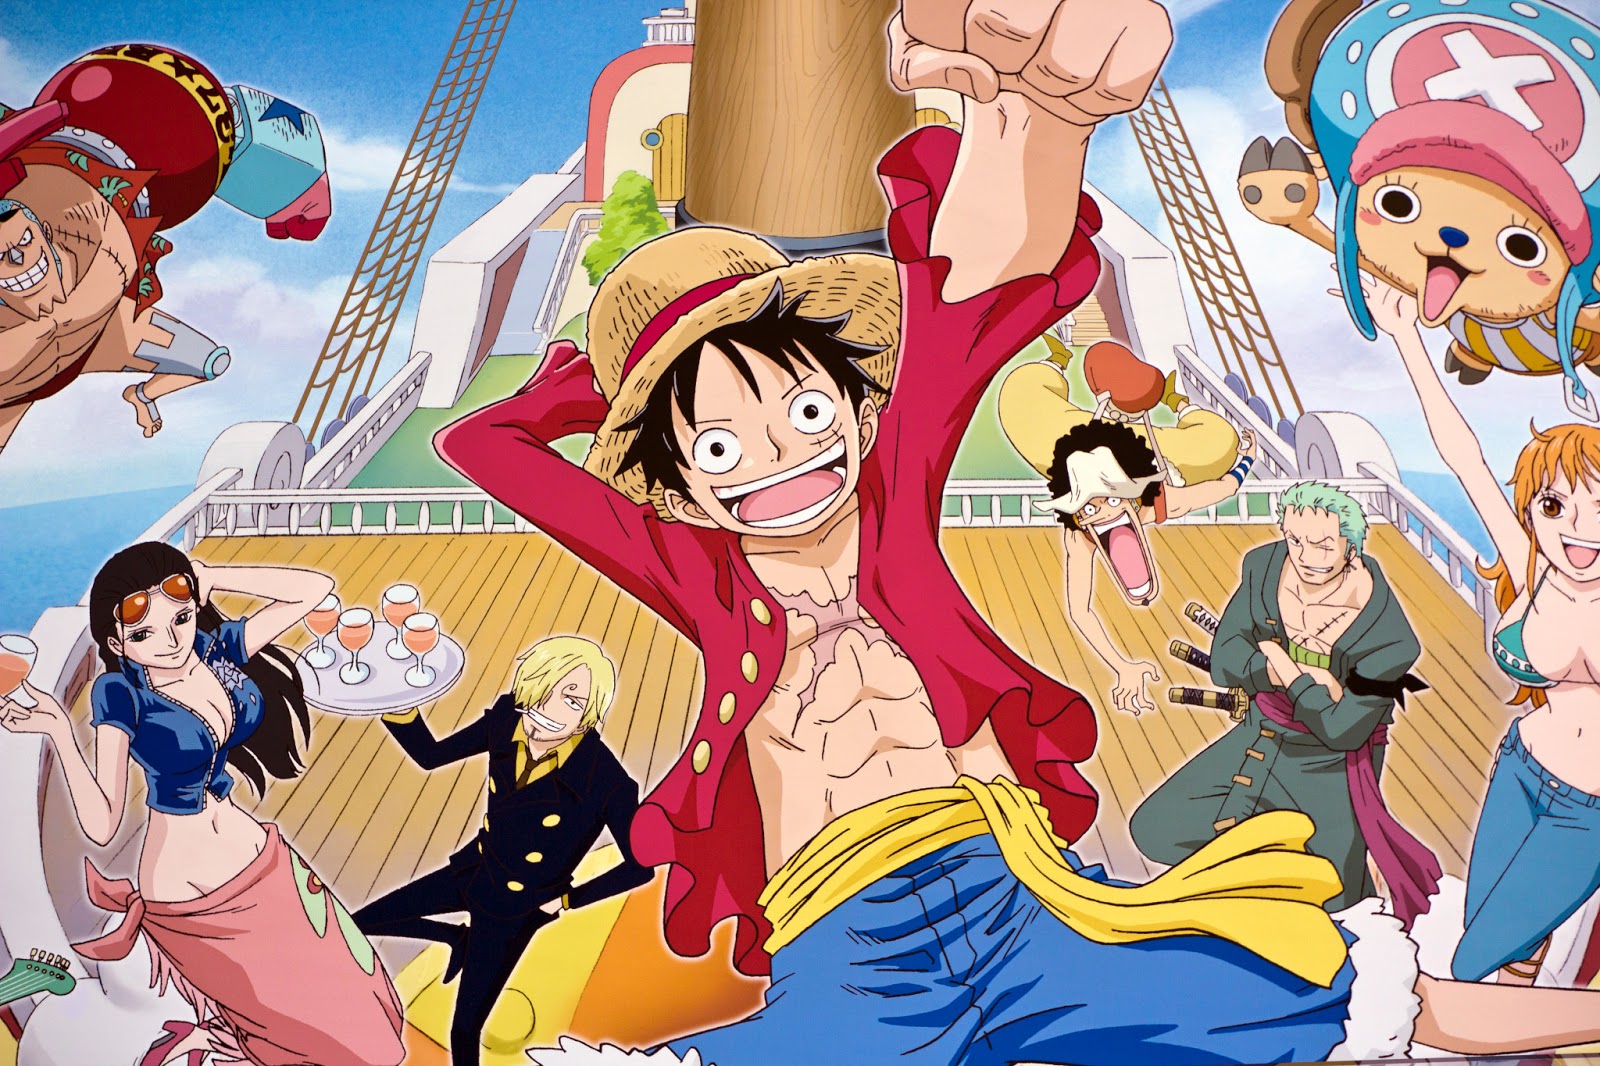  one piece wallpaper backgrounds   Cool Anime Wallpaper Backgrounds